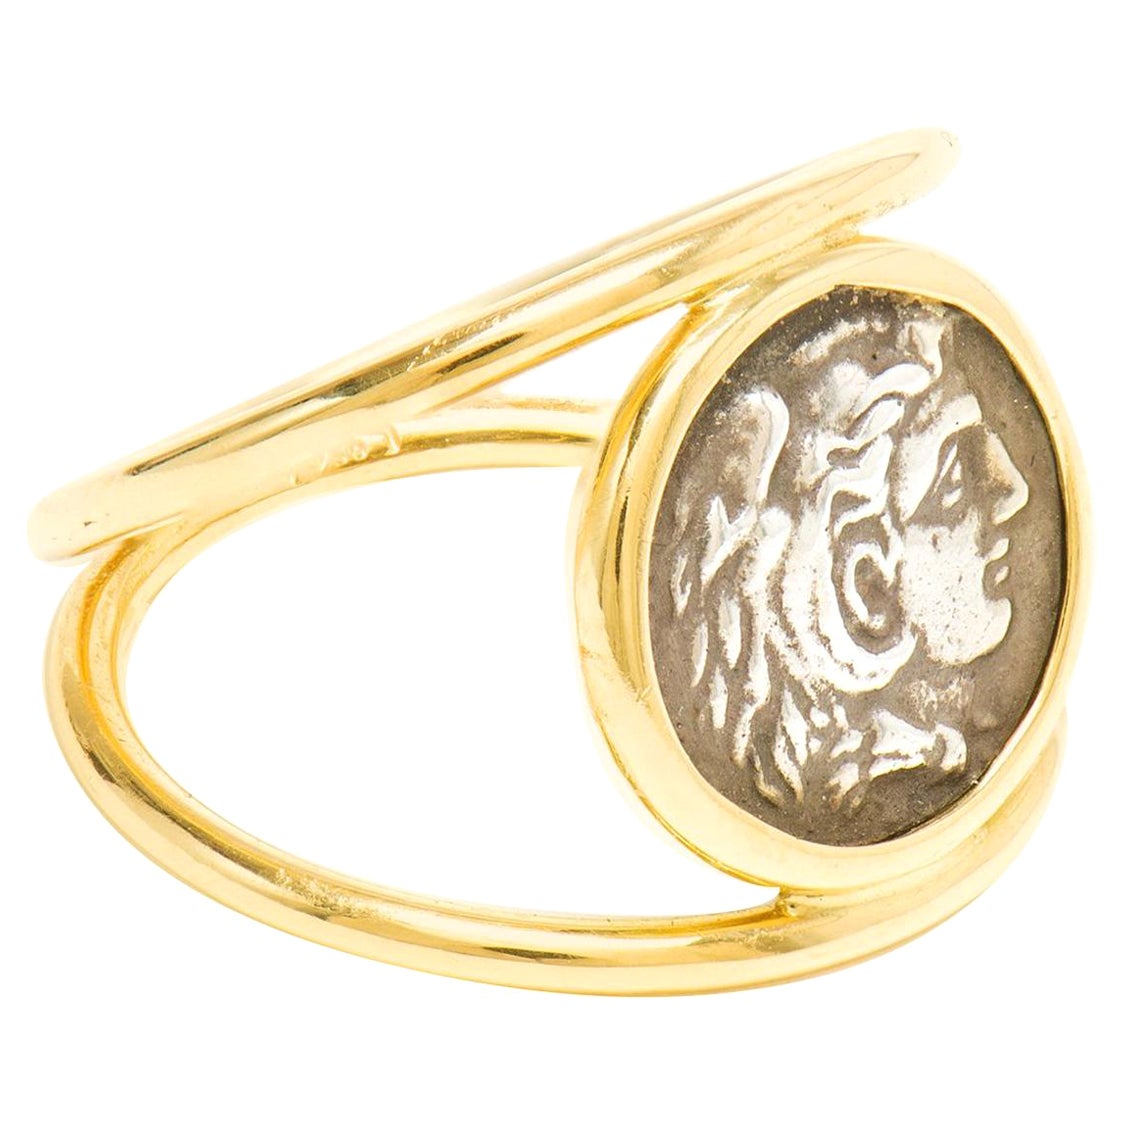 Dubini Alexander the Great Silver Coin 18K Yellow Gold Signet Ring